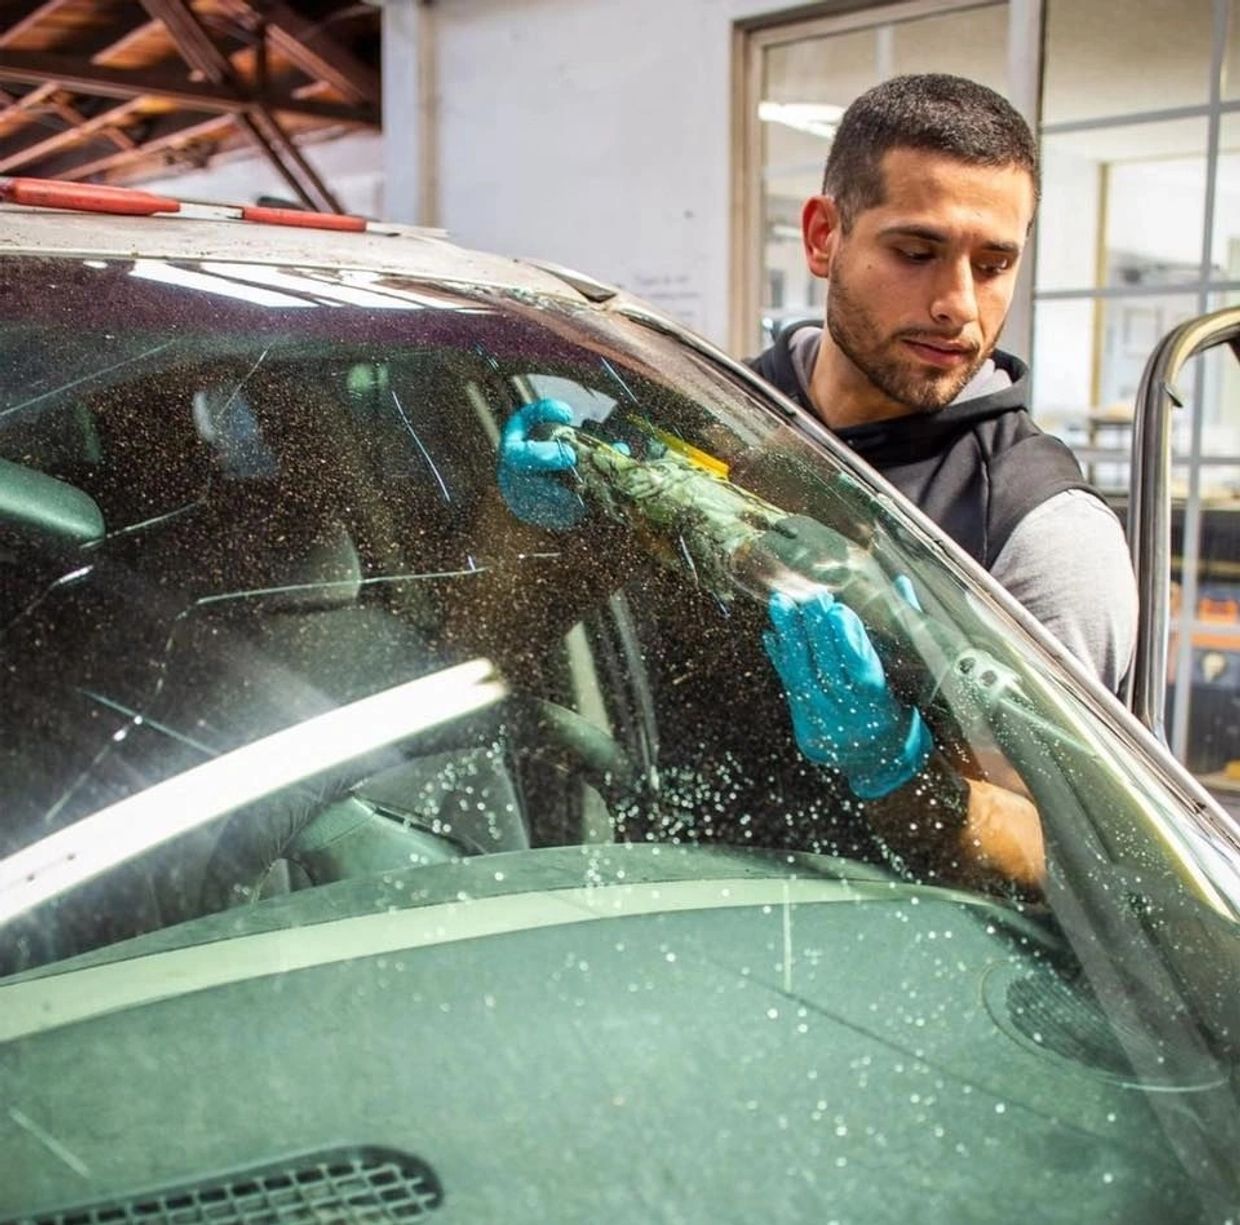 Auto glass installer replacing a front windshield.